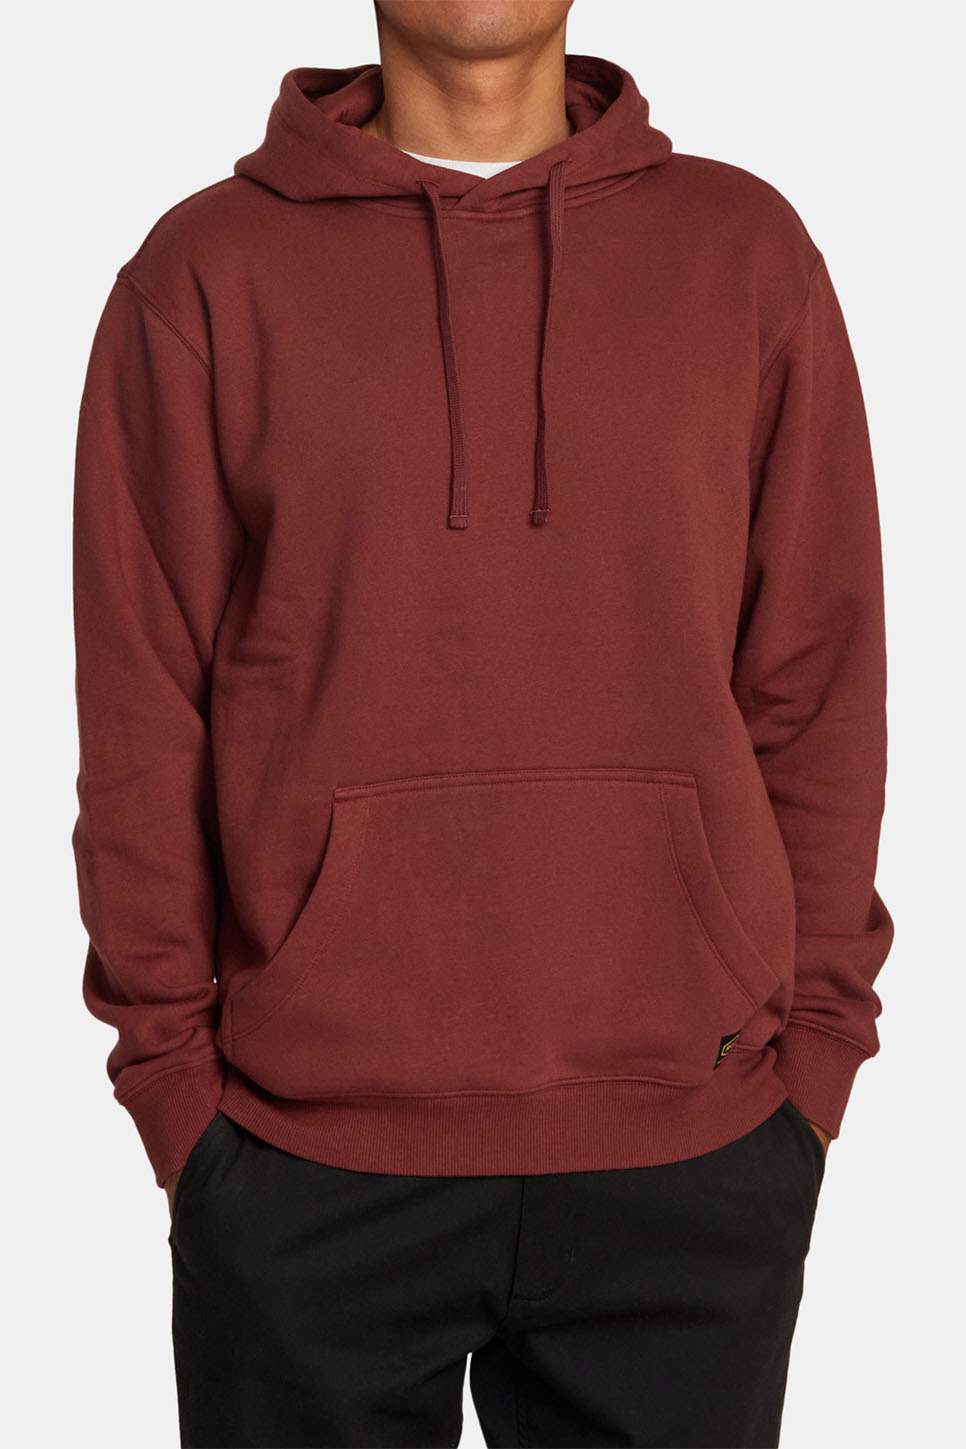 RVCA - Americana Hoodie 2 - Red Earth - Front